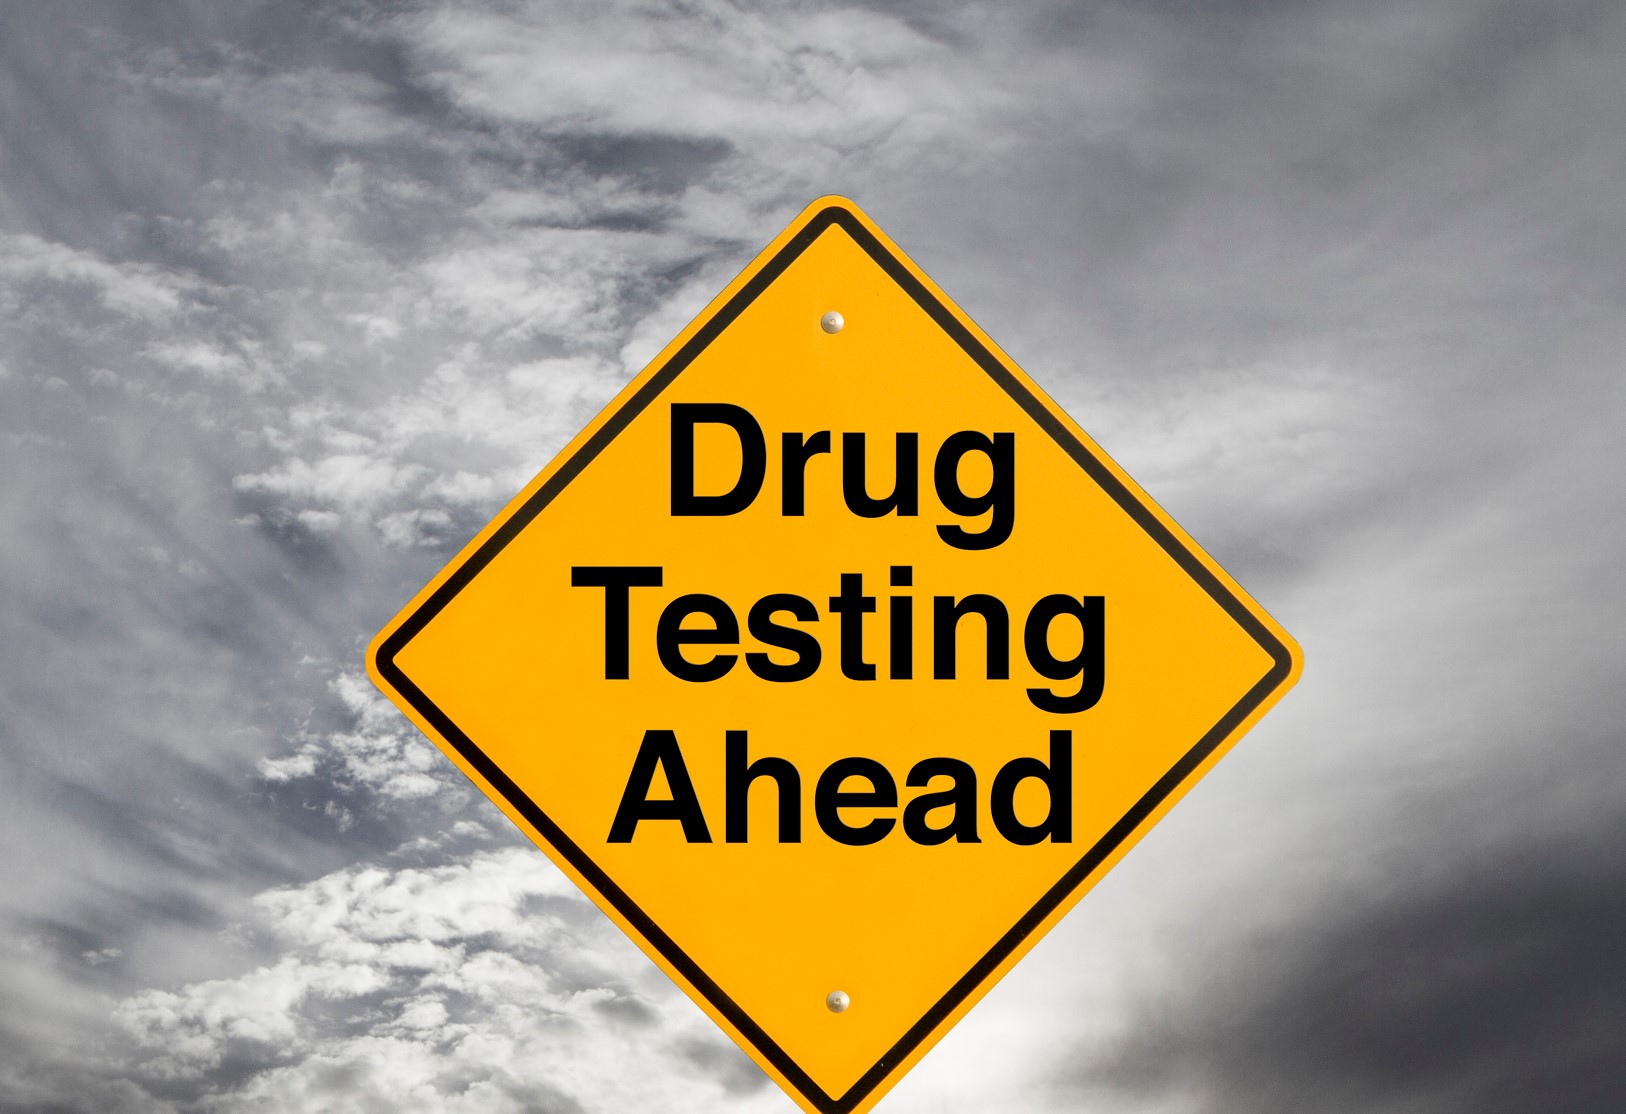 OOIDA refutes claim that hard drug use is under-reported